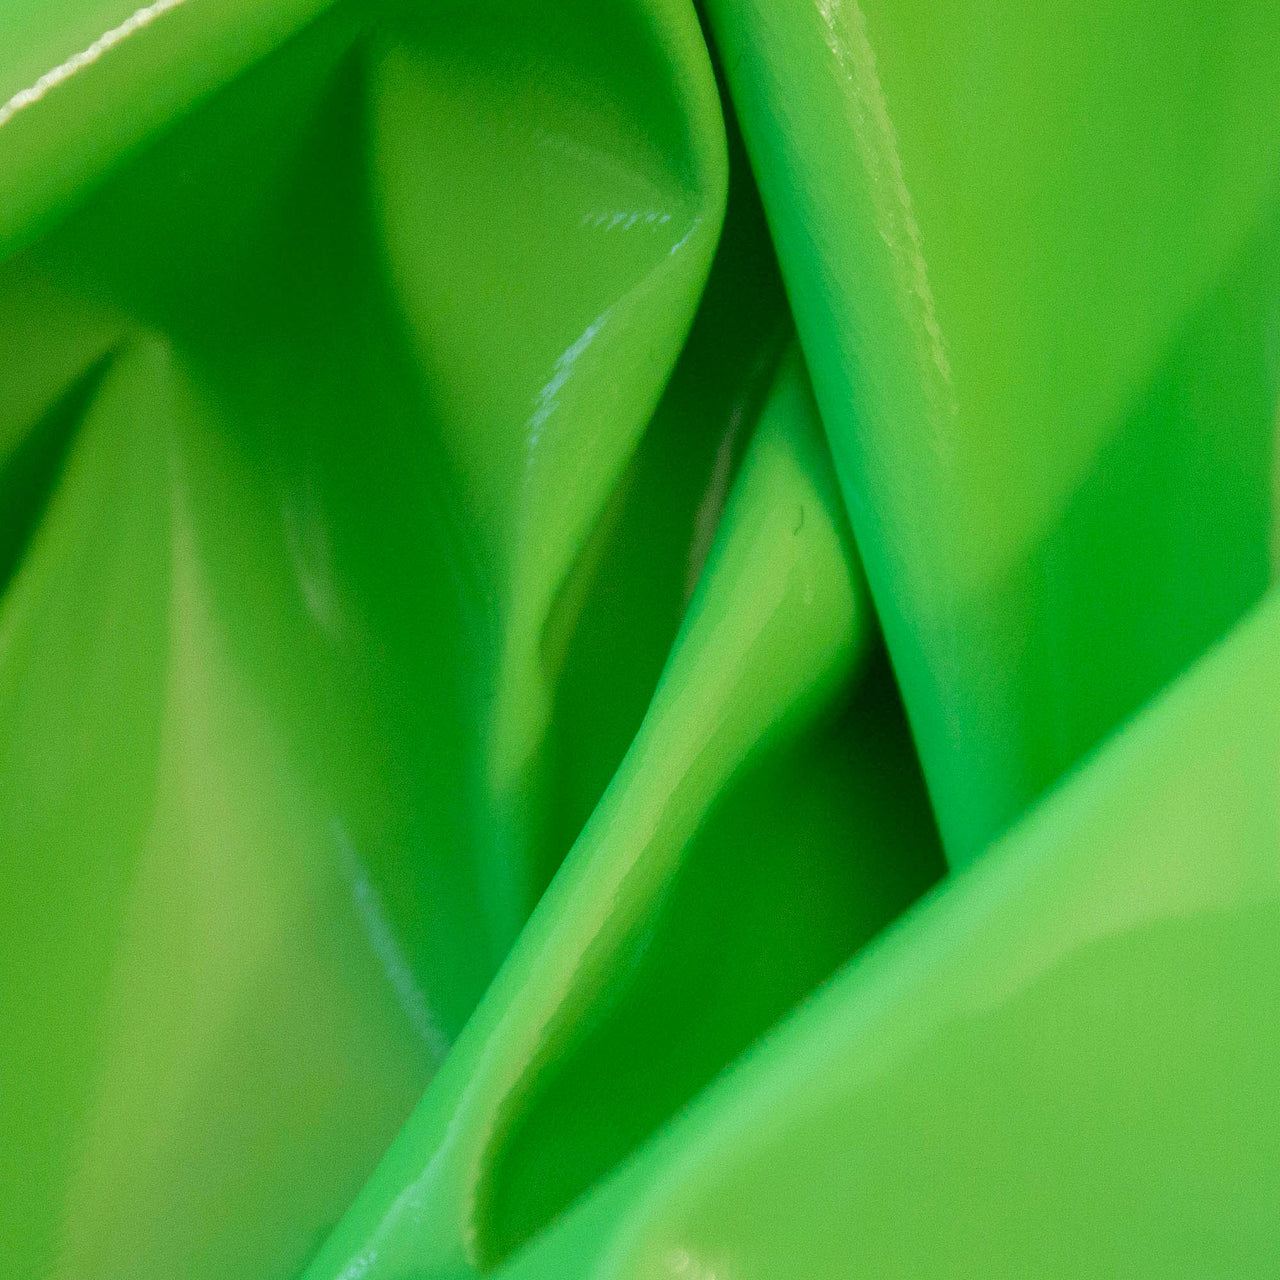 Lime Green PVC Shiny Stretch Fabric - 1 Way Natural Stretch - PU Coated